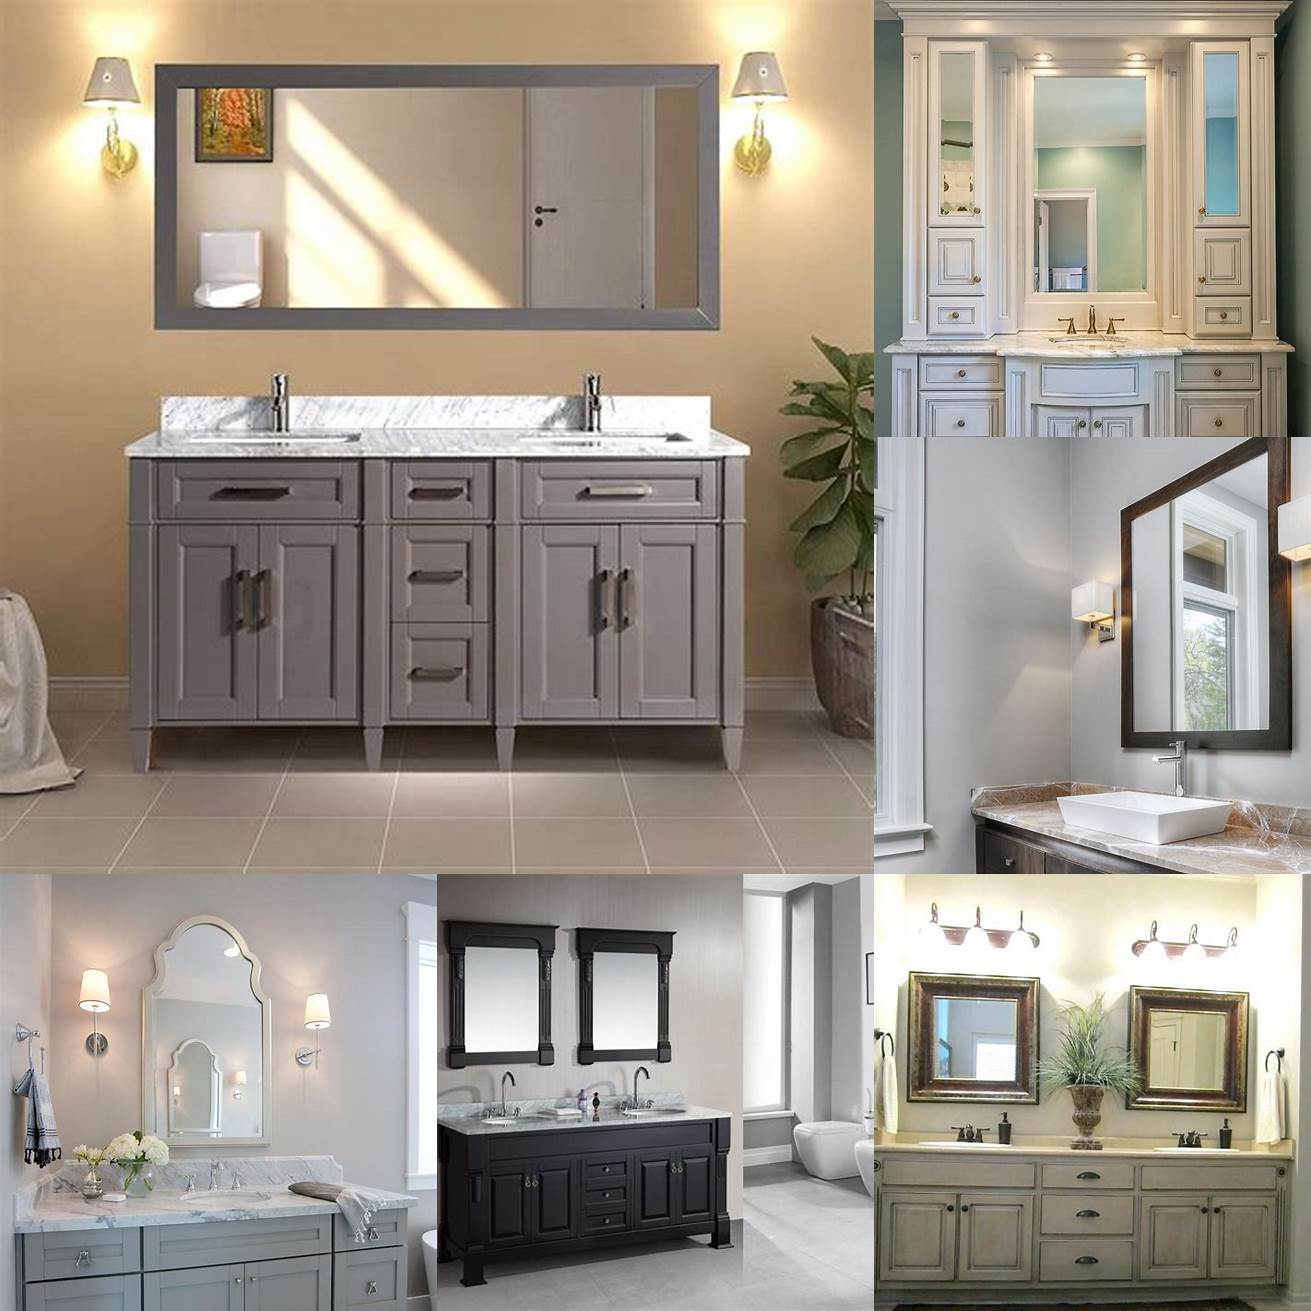 What type of material should I choose for my bathroom vanity and cabinets